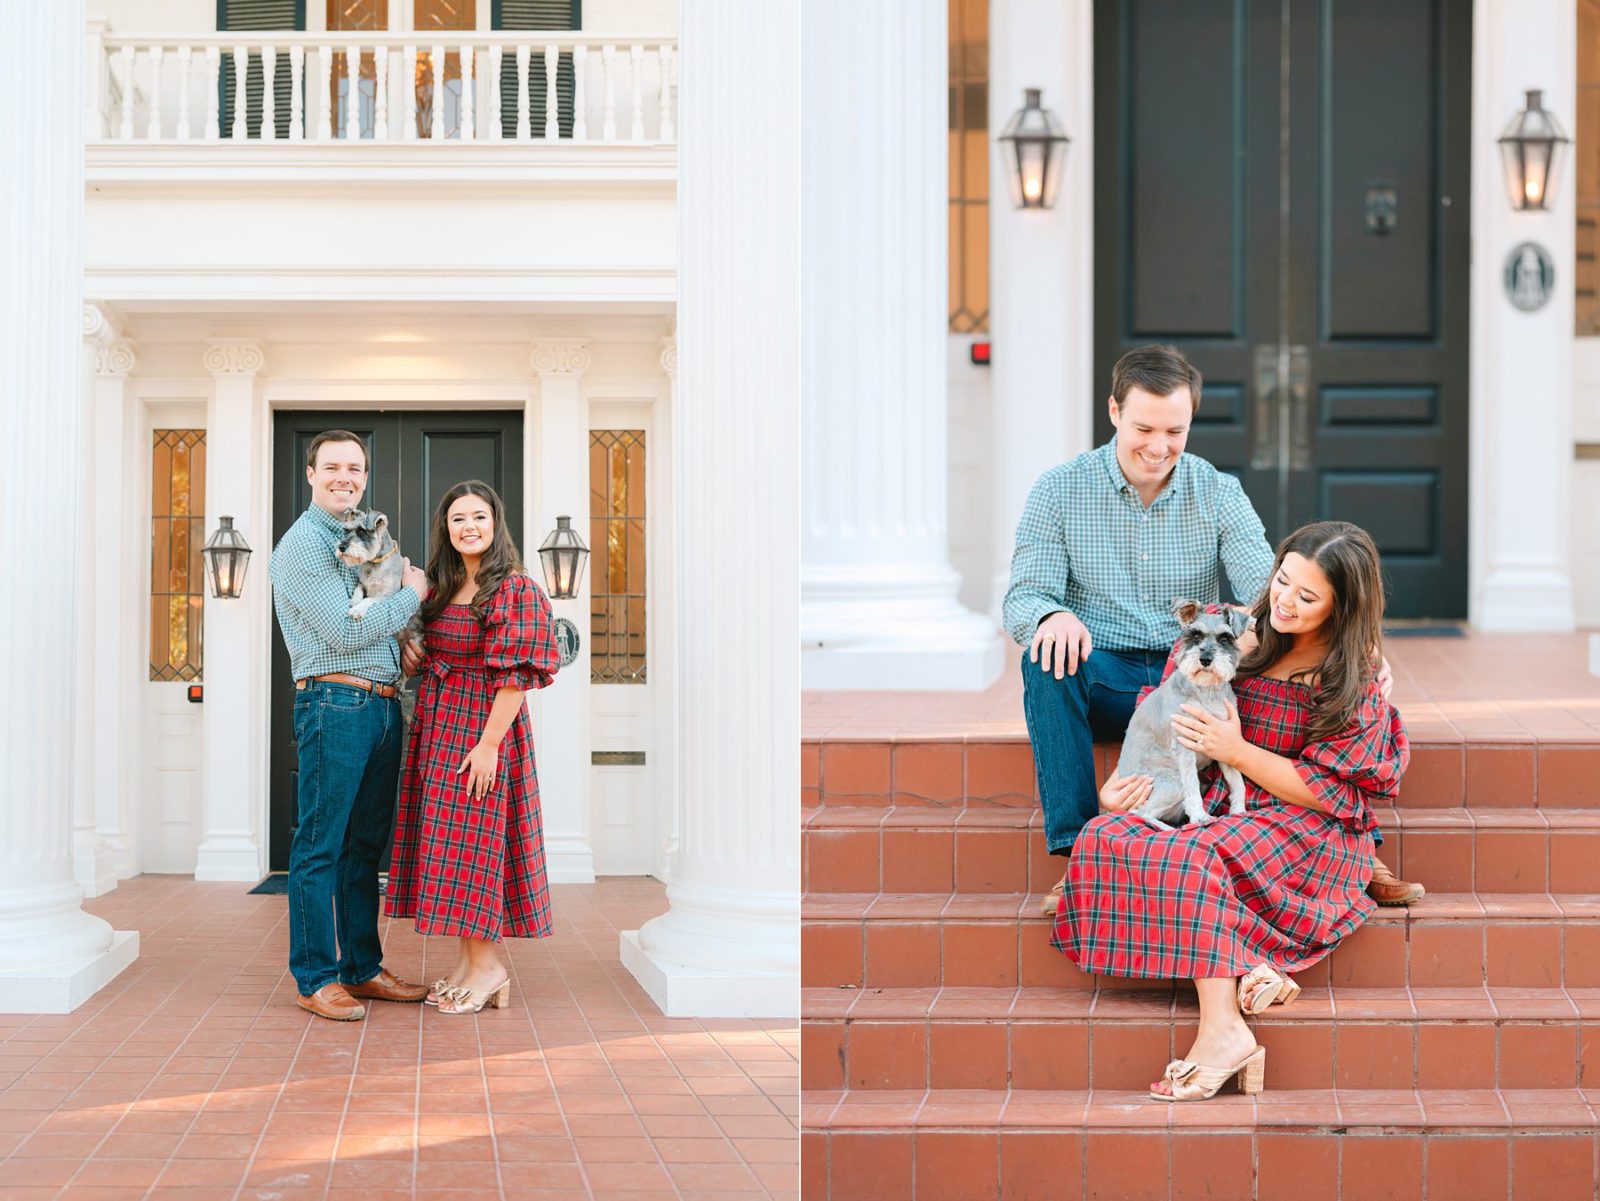 engagement session with dog, christmas photo at woodbine mansion, round rock christmas photos, engagement photo locations in round rock, woodbine mansion, round rock wedding venue, tara lyons photography